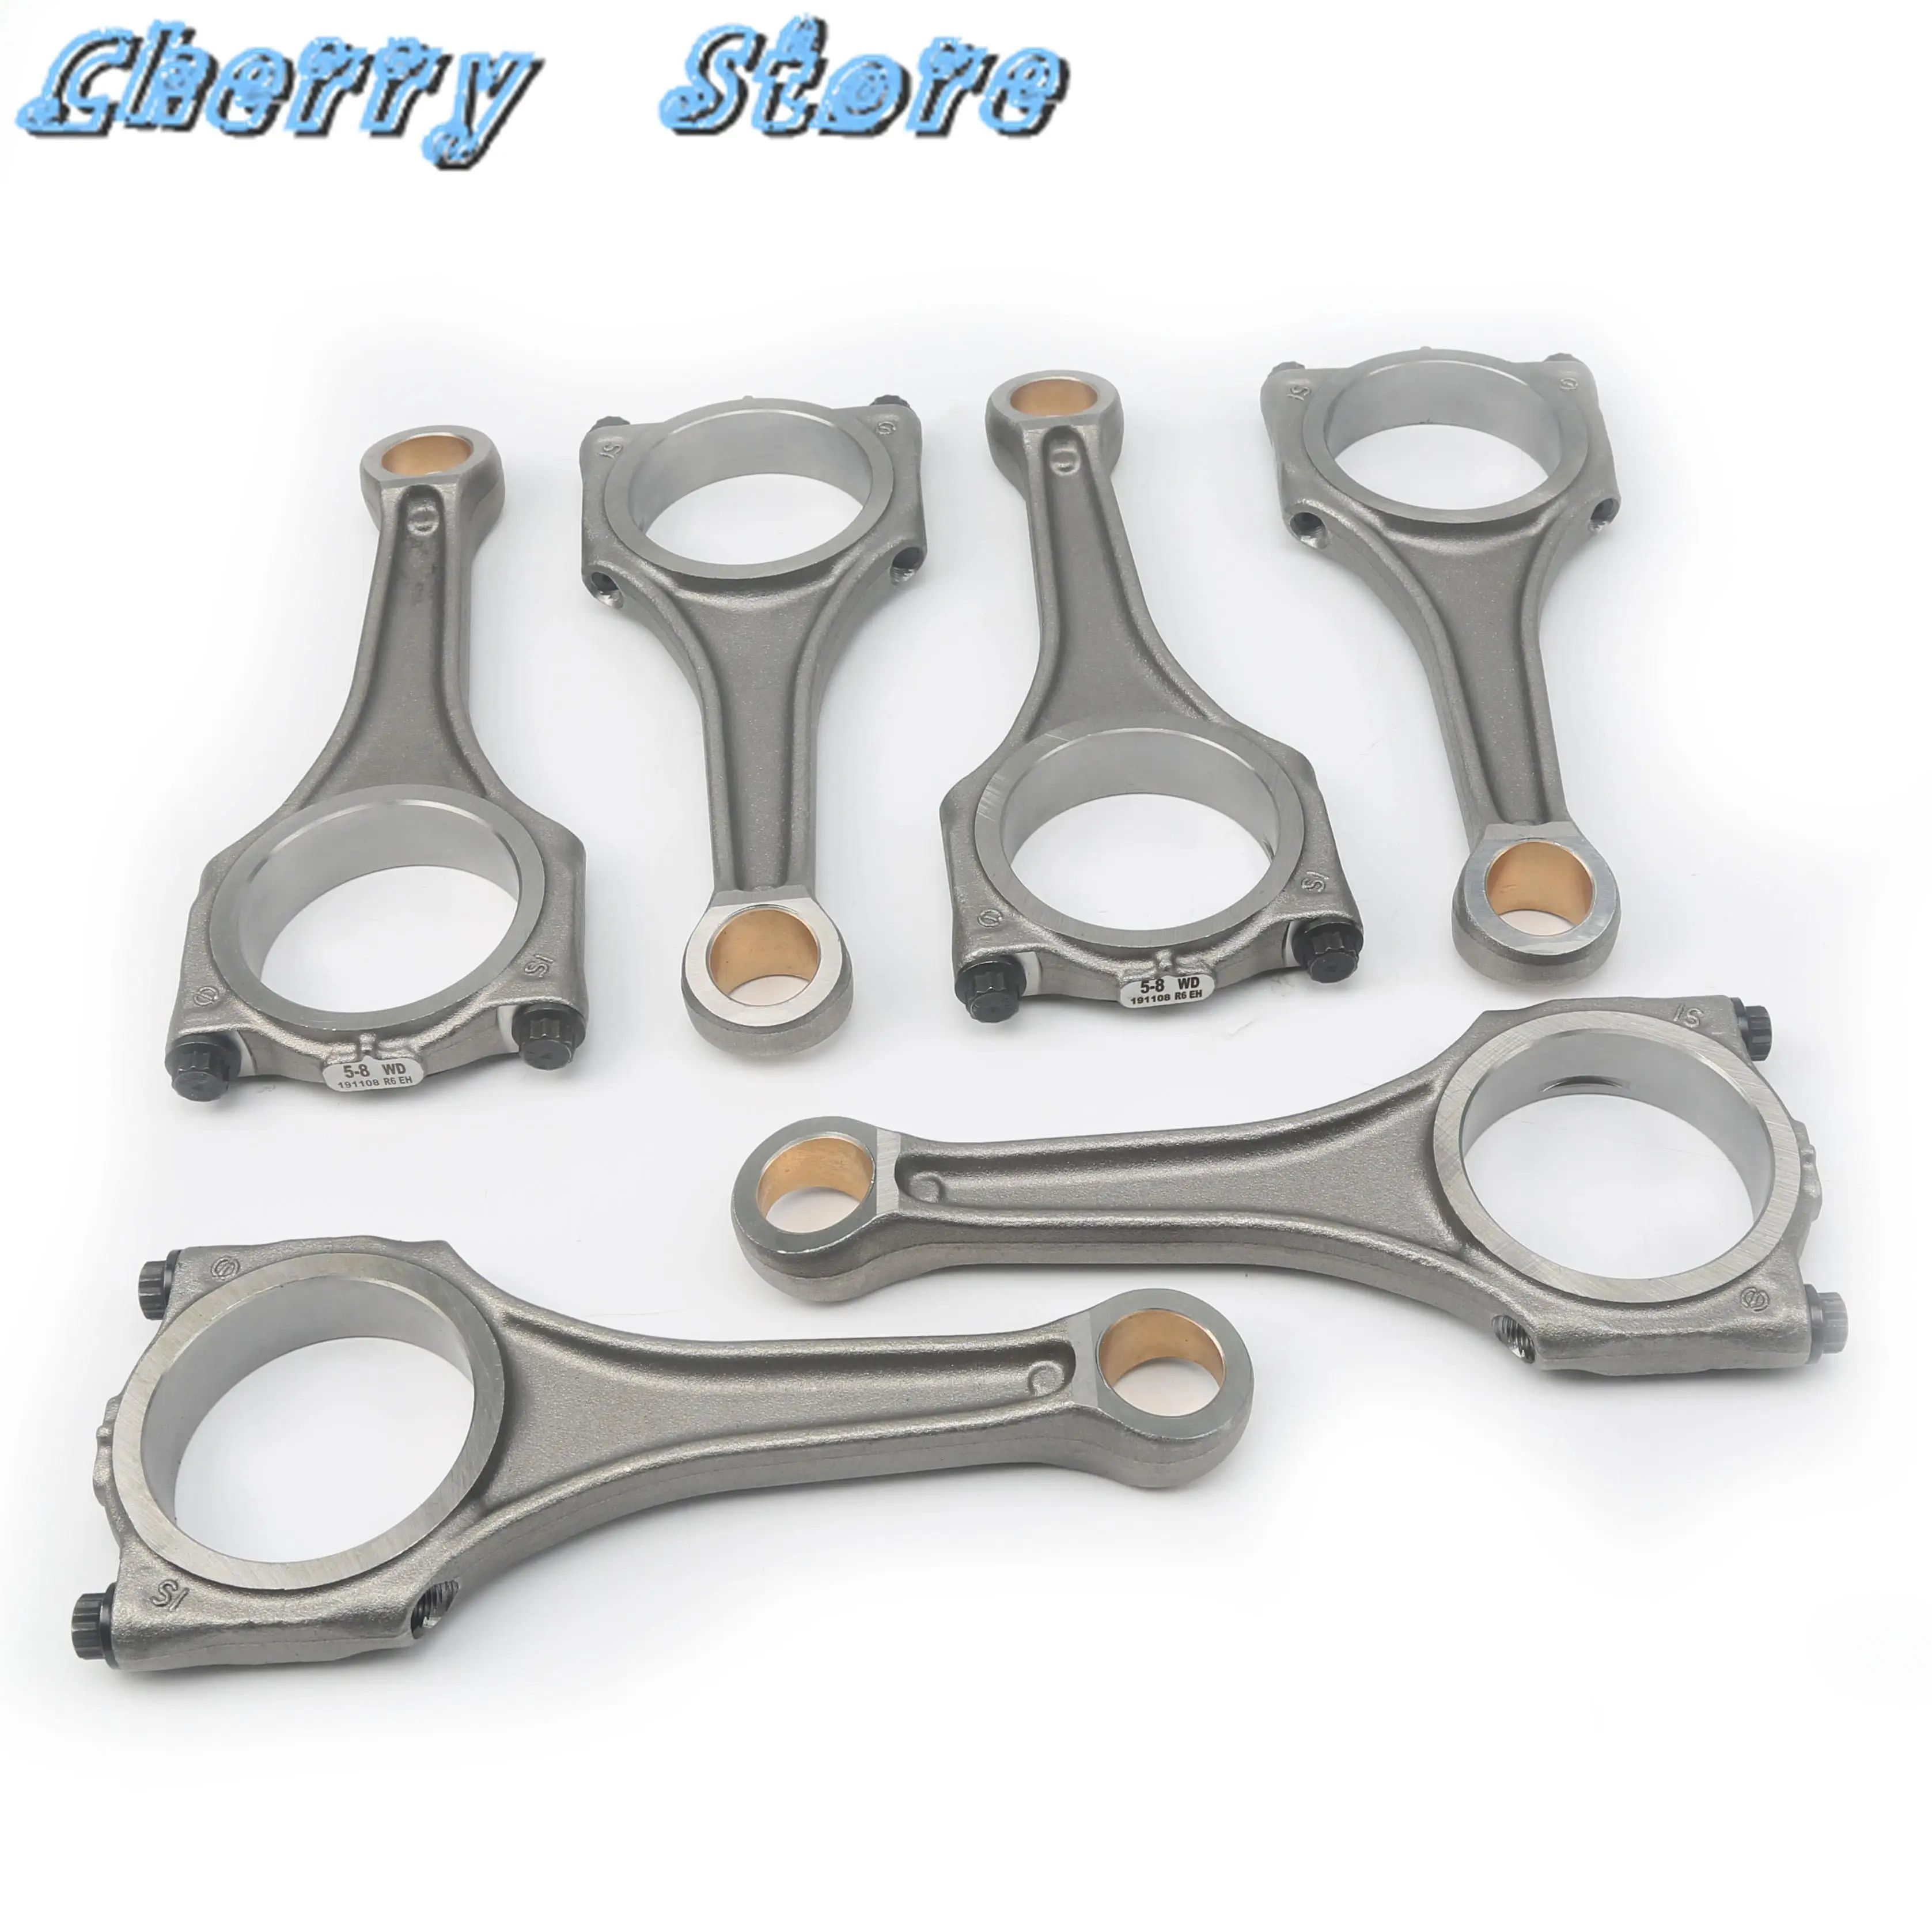 

22MM 6x Connecting Rod For VW Touareg Audi S4 A4 B8 A5 S5 A6 C6 A6 Allroad A7 A8 Q5 Q7 SQ5 3.0 TFSI V6 06E 198 401 D 06E198401J